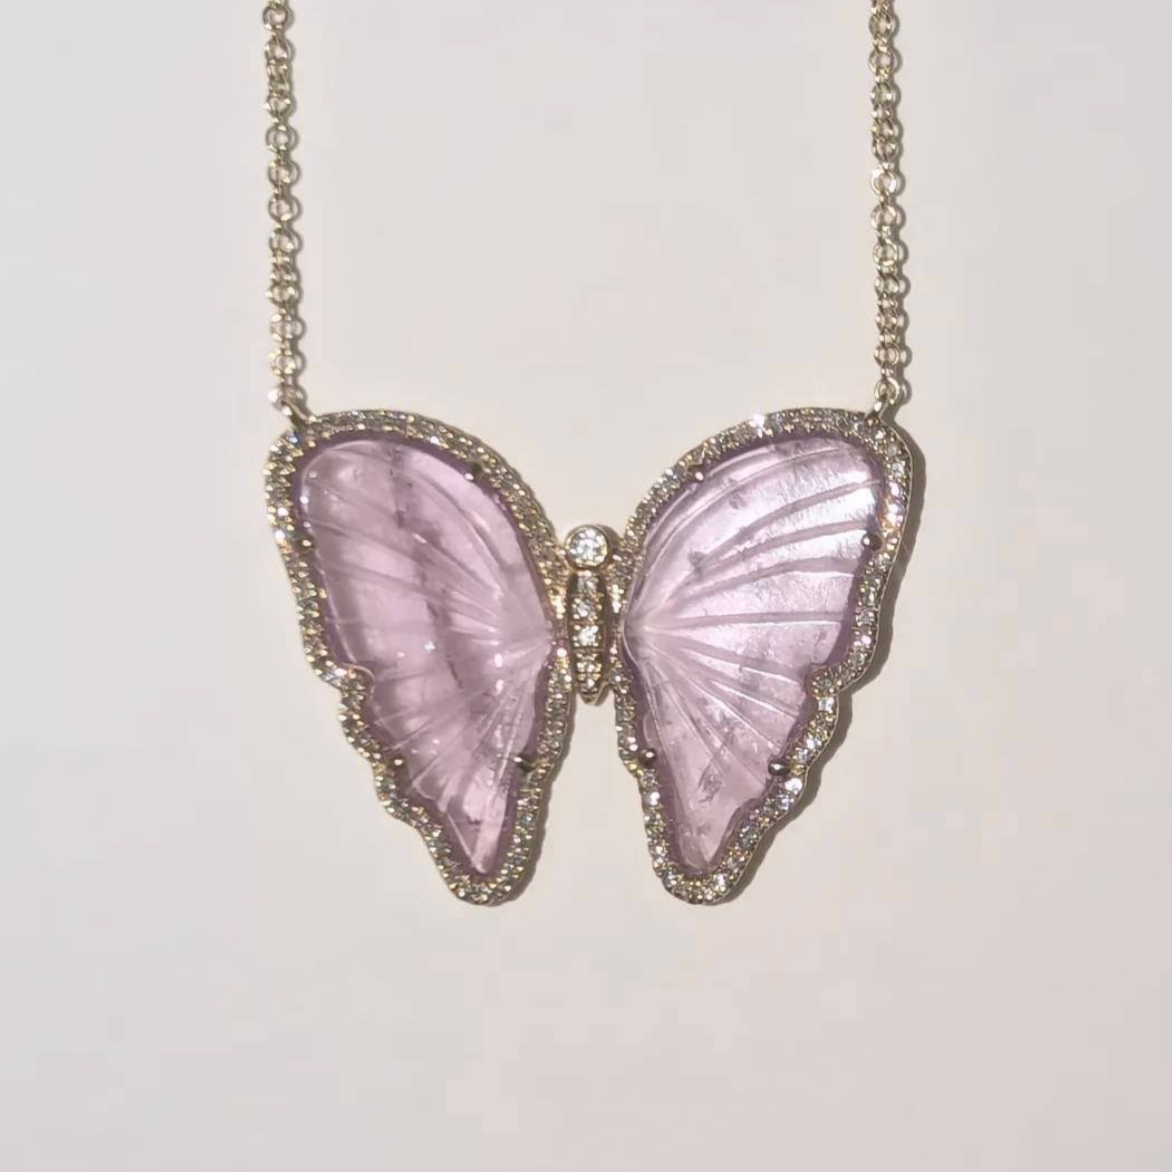 Lavender Purple Tourmaline Butterfly Necklace with Diamonds